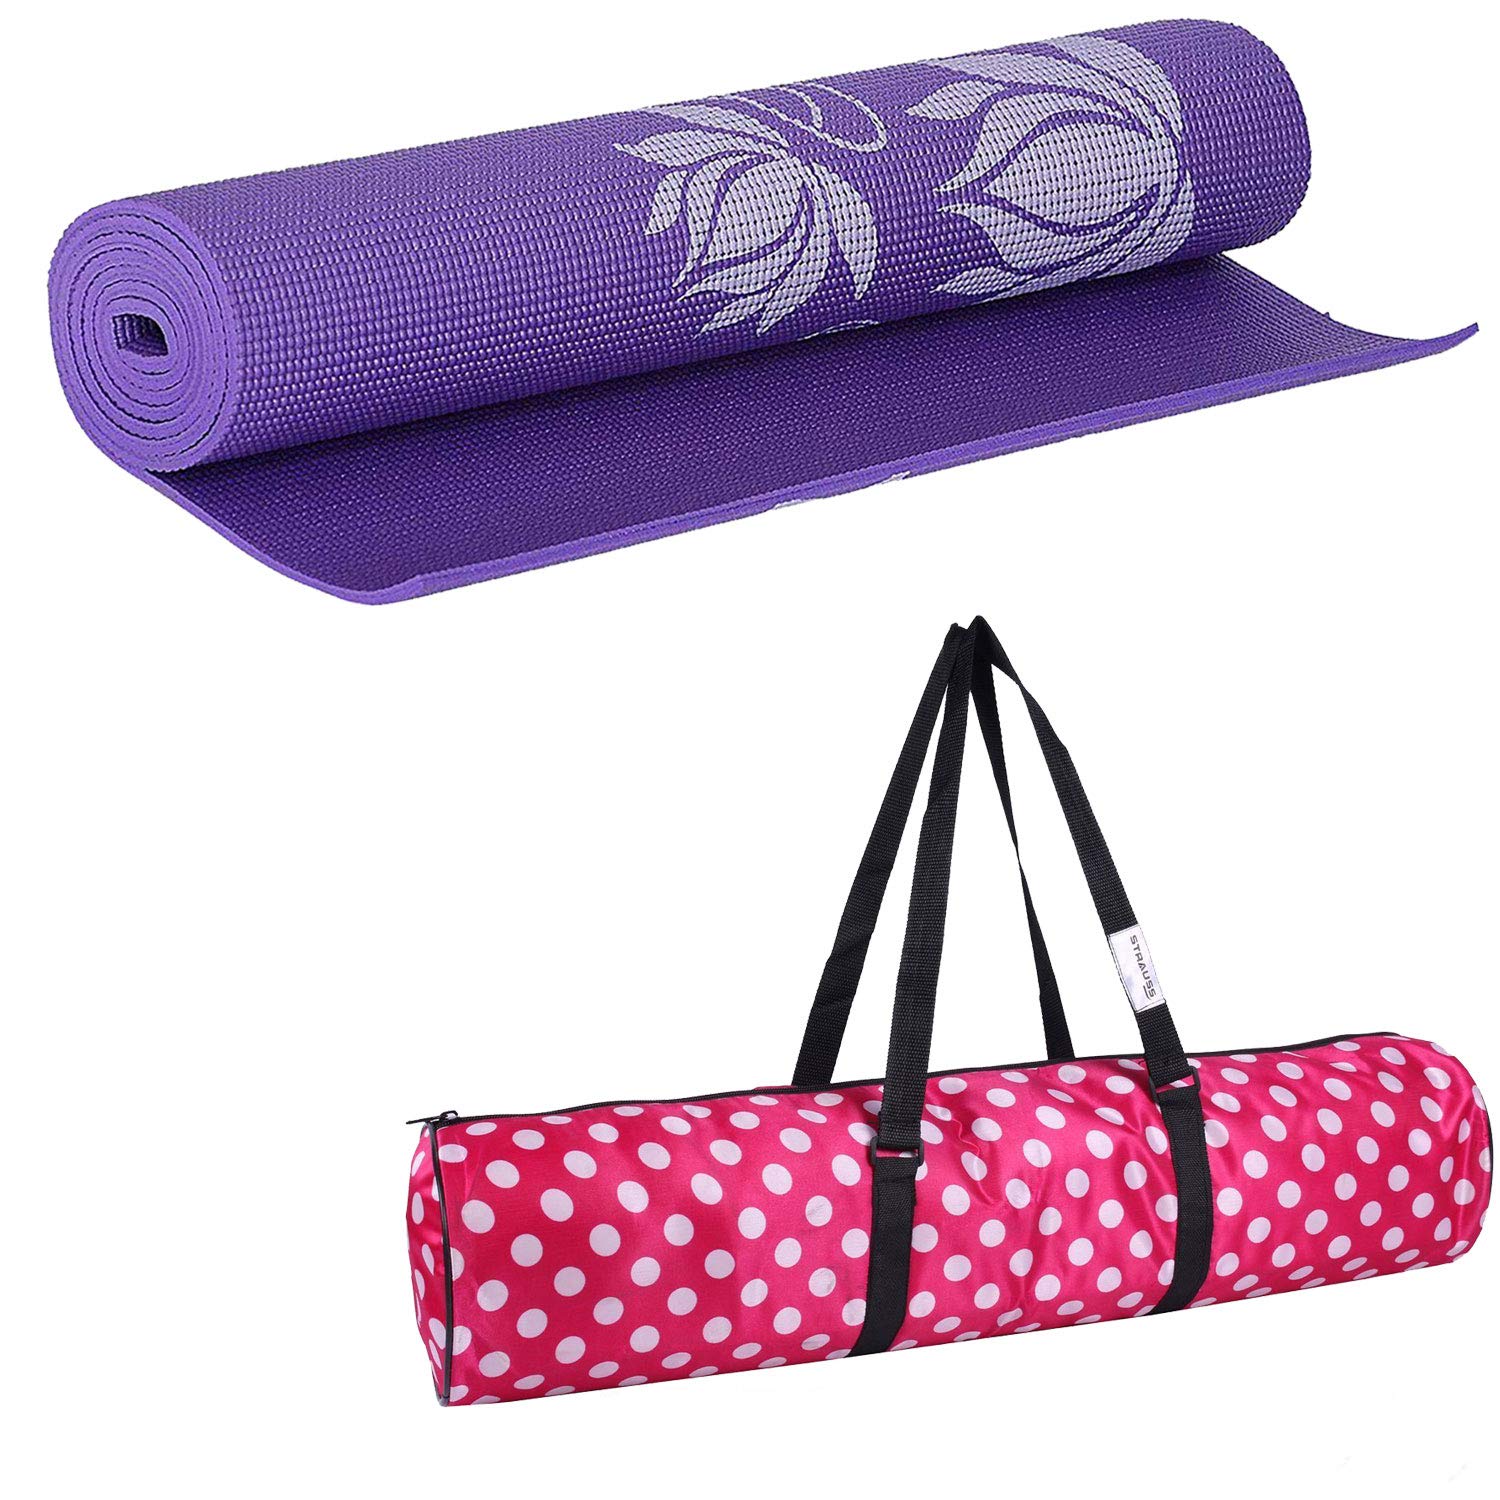 Strauss Yoga Mat, 6mm (Purple Floral) and Cooling Towel, 80 cm, (Purple)